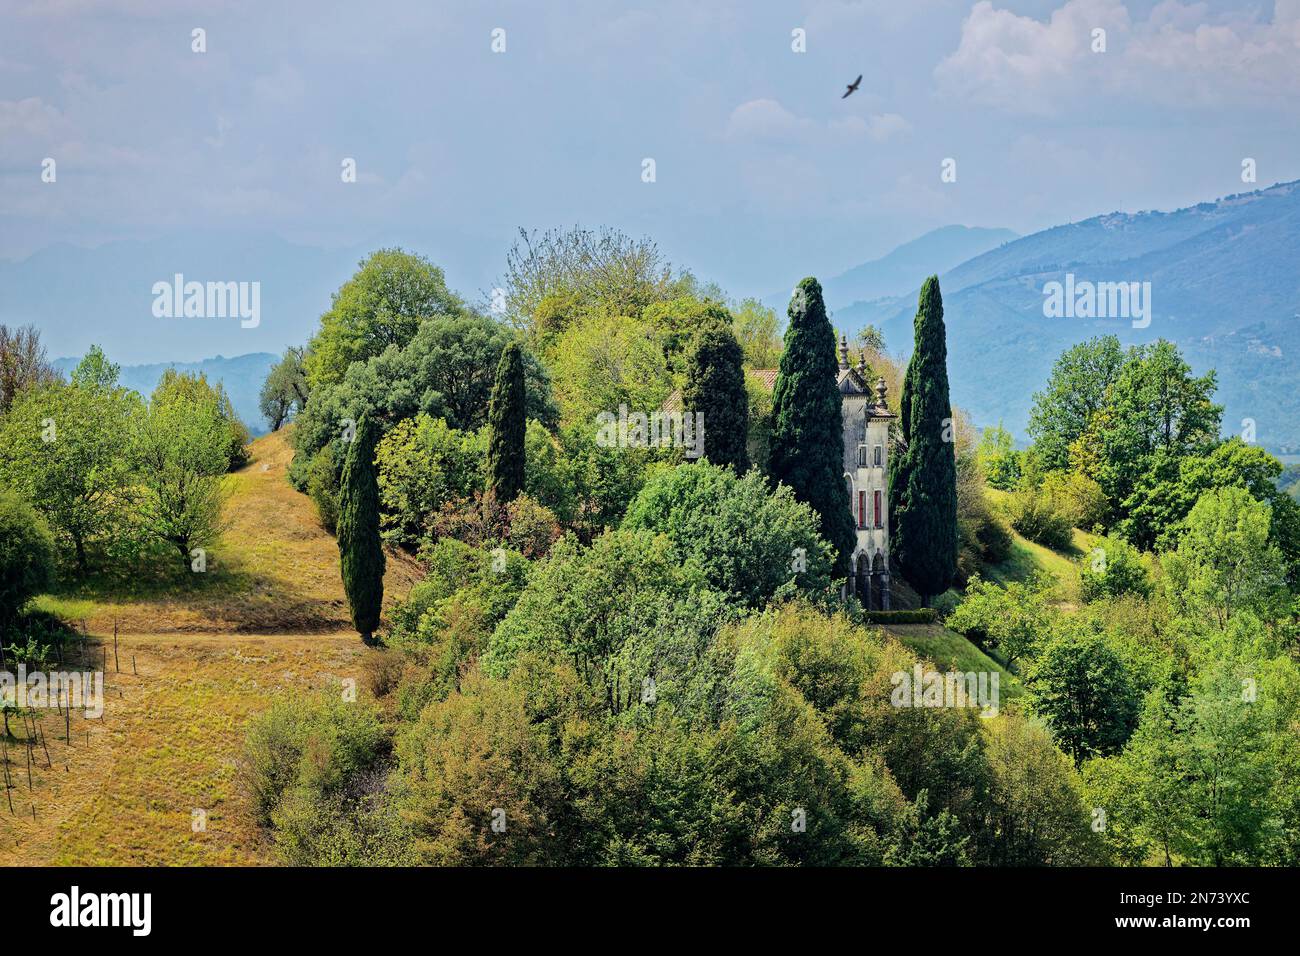 A house hidden among trees on a hill in the northern Italian town of Asolo Stock Photo